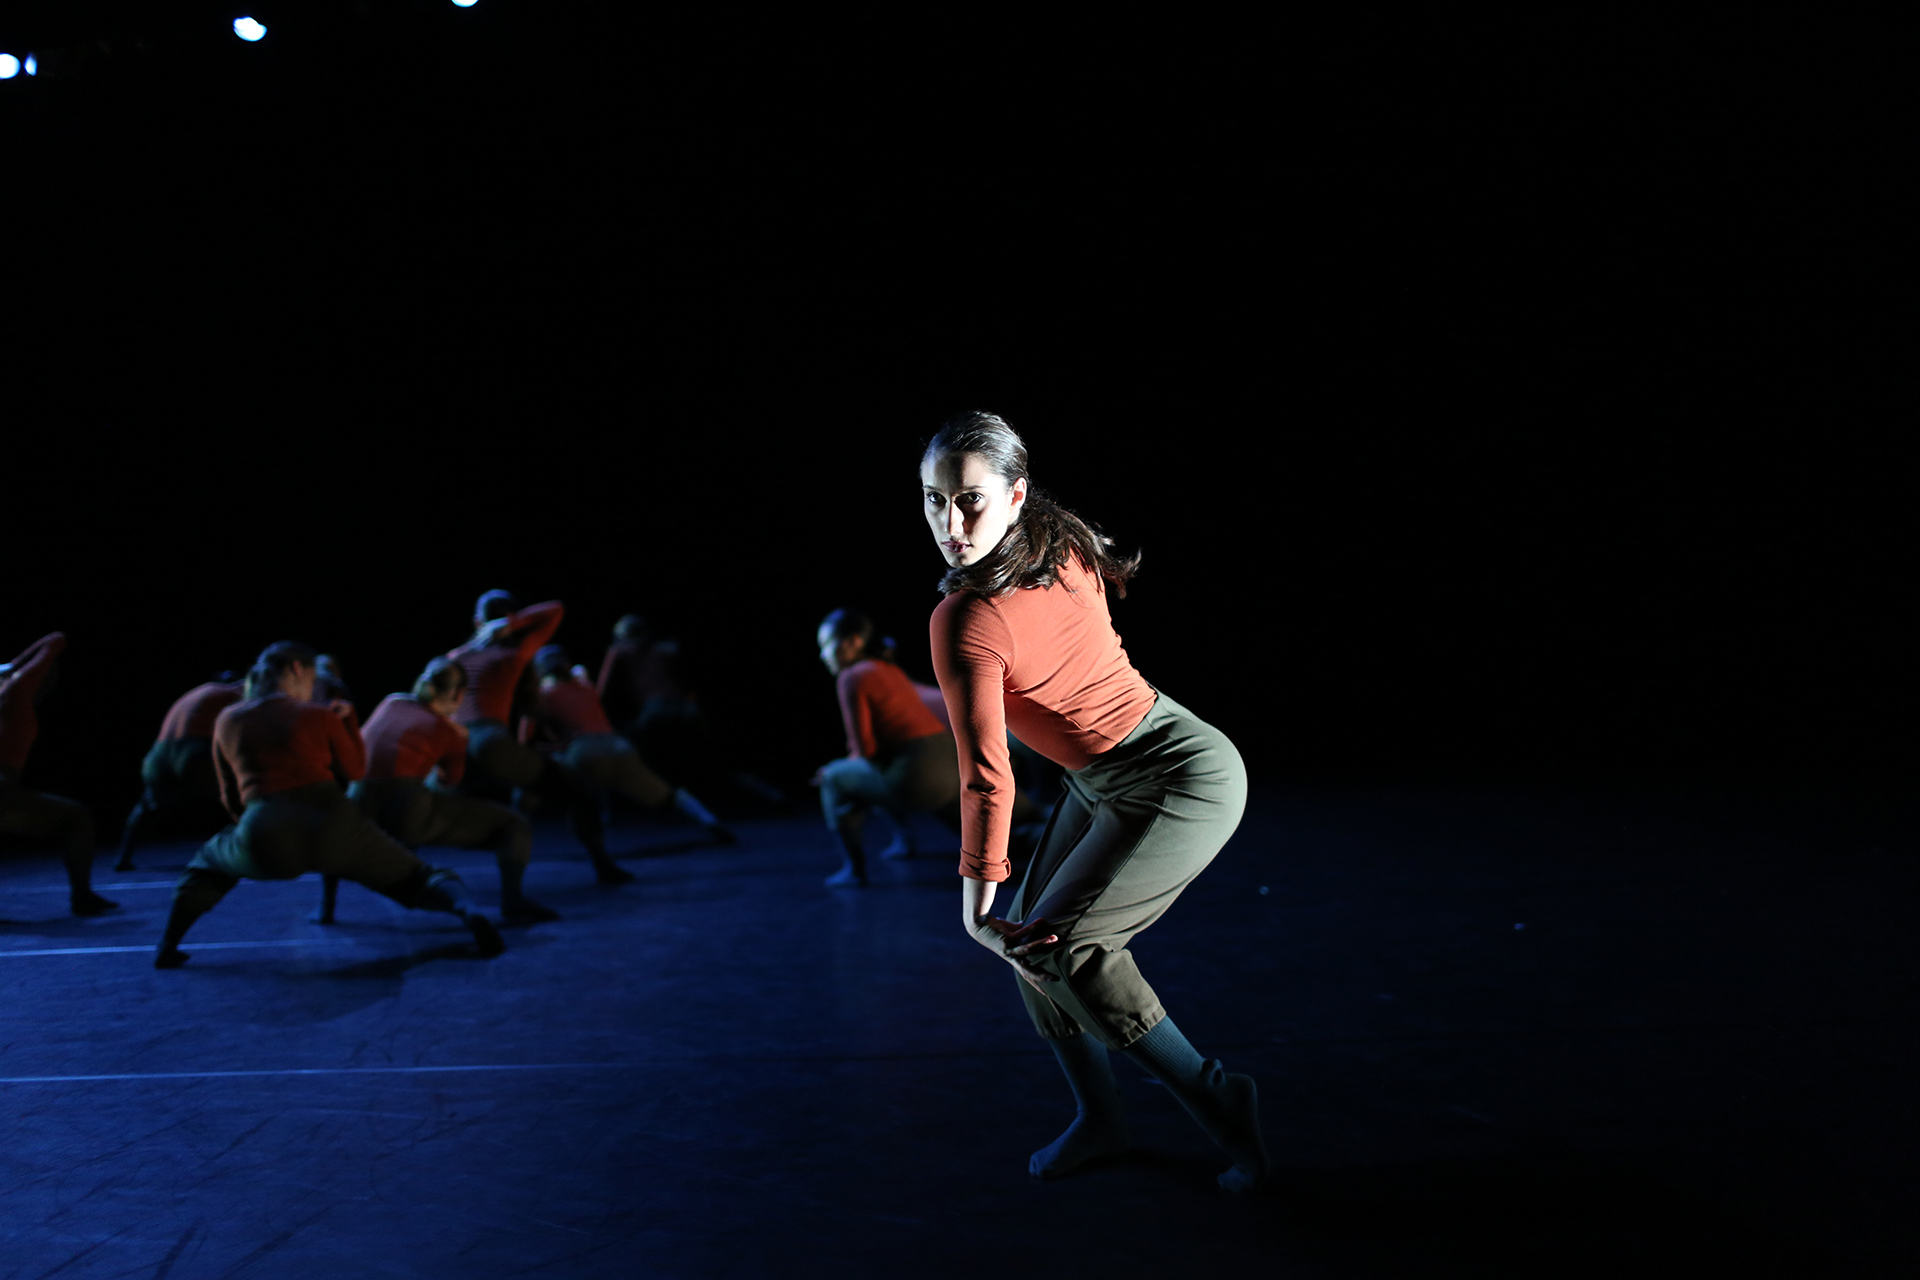 SADC October 2018 "In Company" Choreographed by Yin-Yue Dance Company